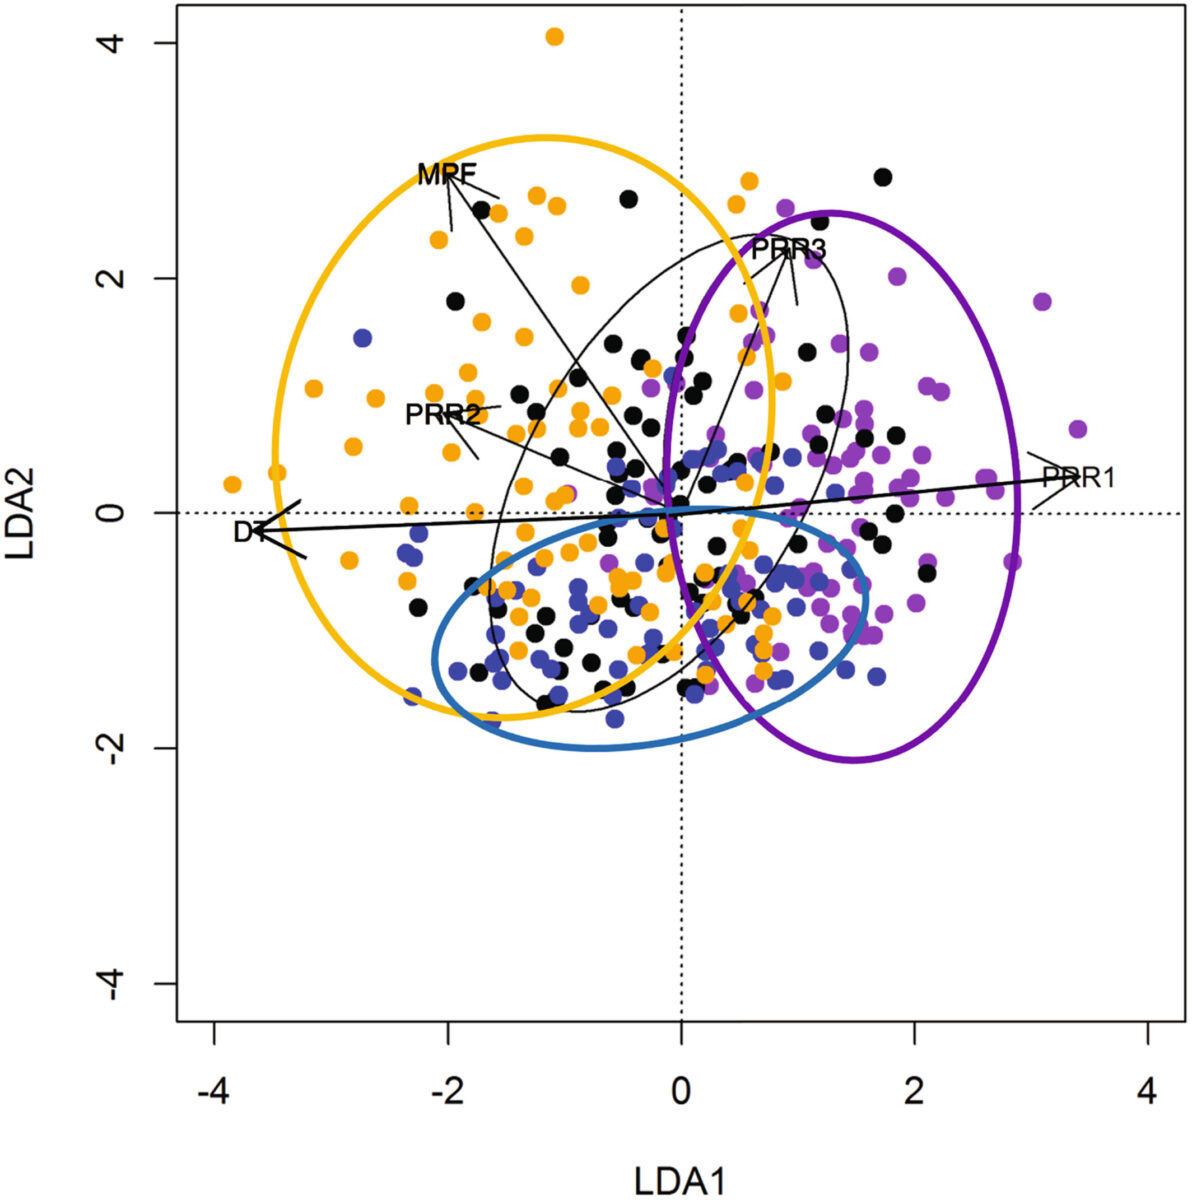 Linear Discriminant Analysis of 4 Populations along linear discriminant axes 1 and 2. The 4 populations consist of the Eastern Beaufort Sea (Purple), The St. Lawrence Estuary (Orange), Western Hudson Bay (Black) and Eastern High Arctic-Baffin Bay (Blue). The 5 acoustic parameters examined are delta time (DT), Pulse repetition rate (PRR) 1, 2 and 3 and peak frequency (PF). Ellipses signify 95% confidence intervals.